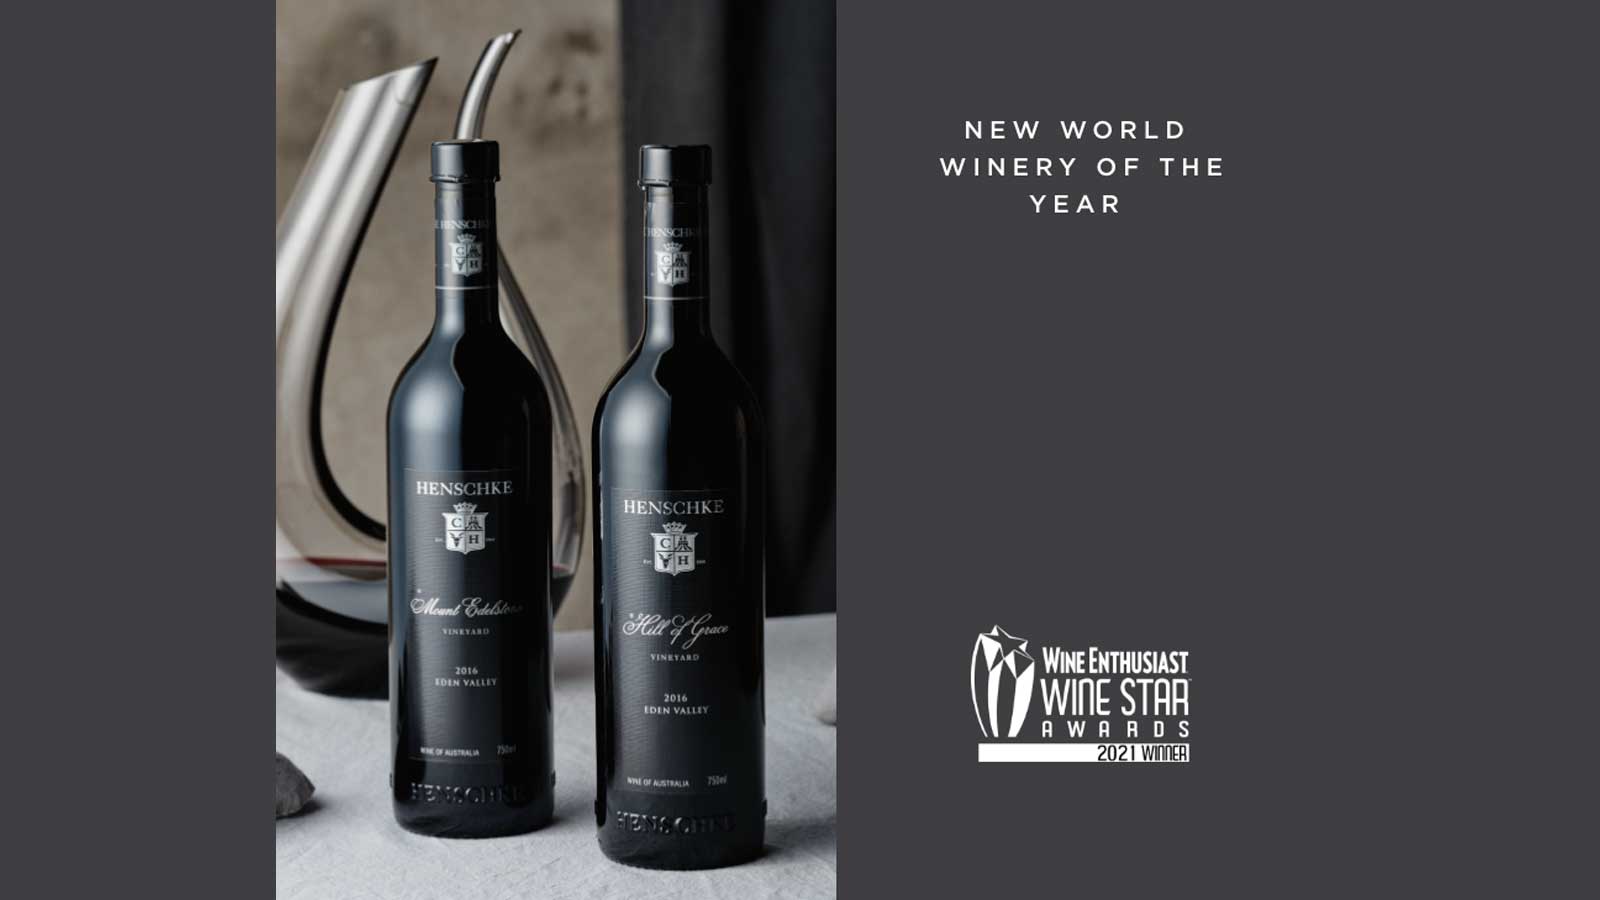 Henschke awarded Wine Enthusiast’s 2021 New World Winery of the Year 